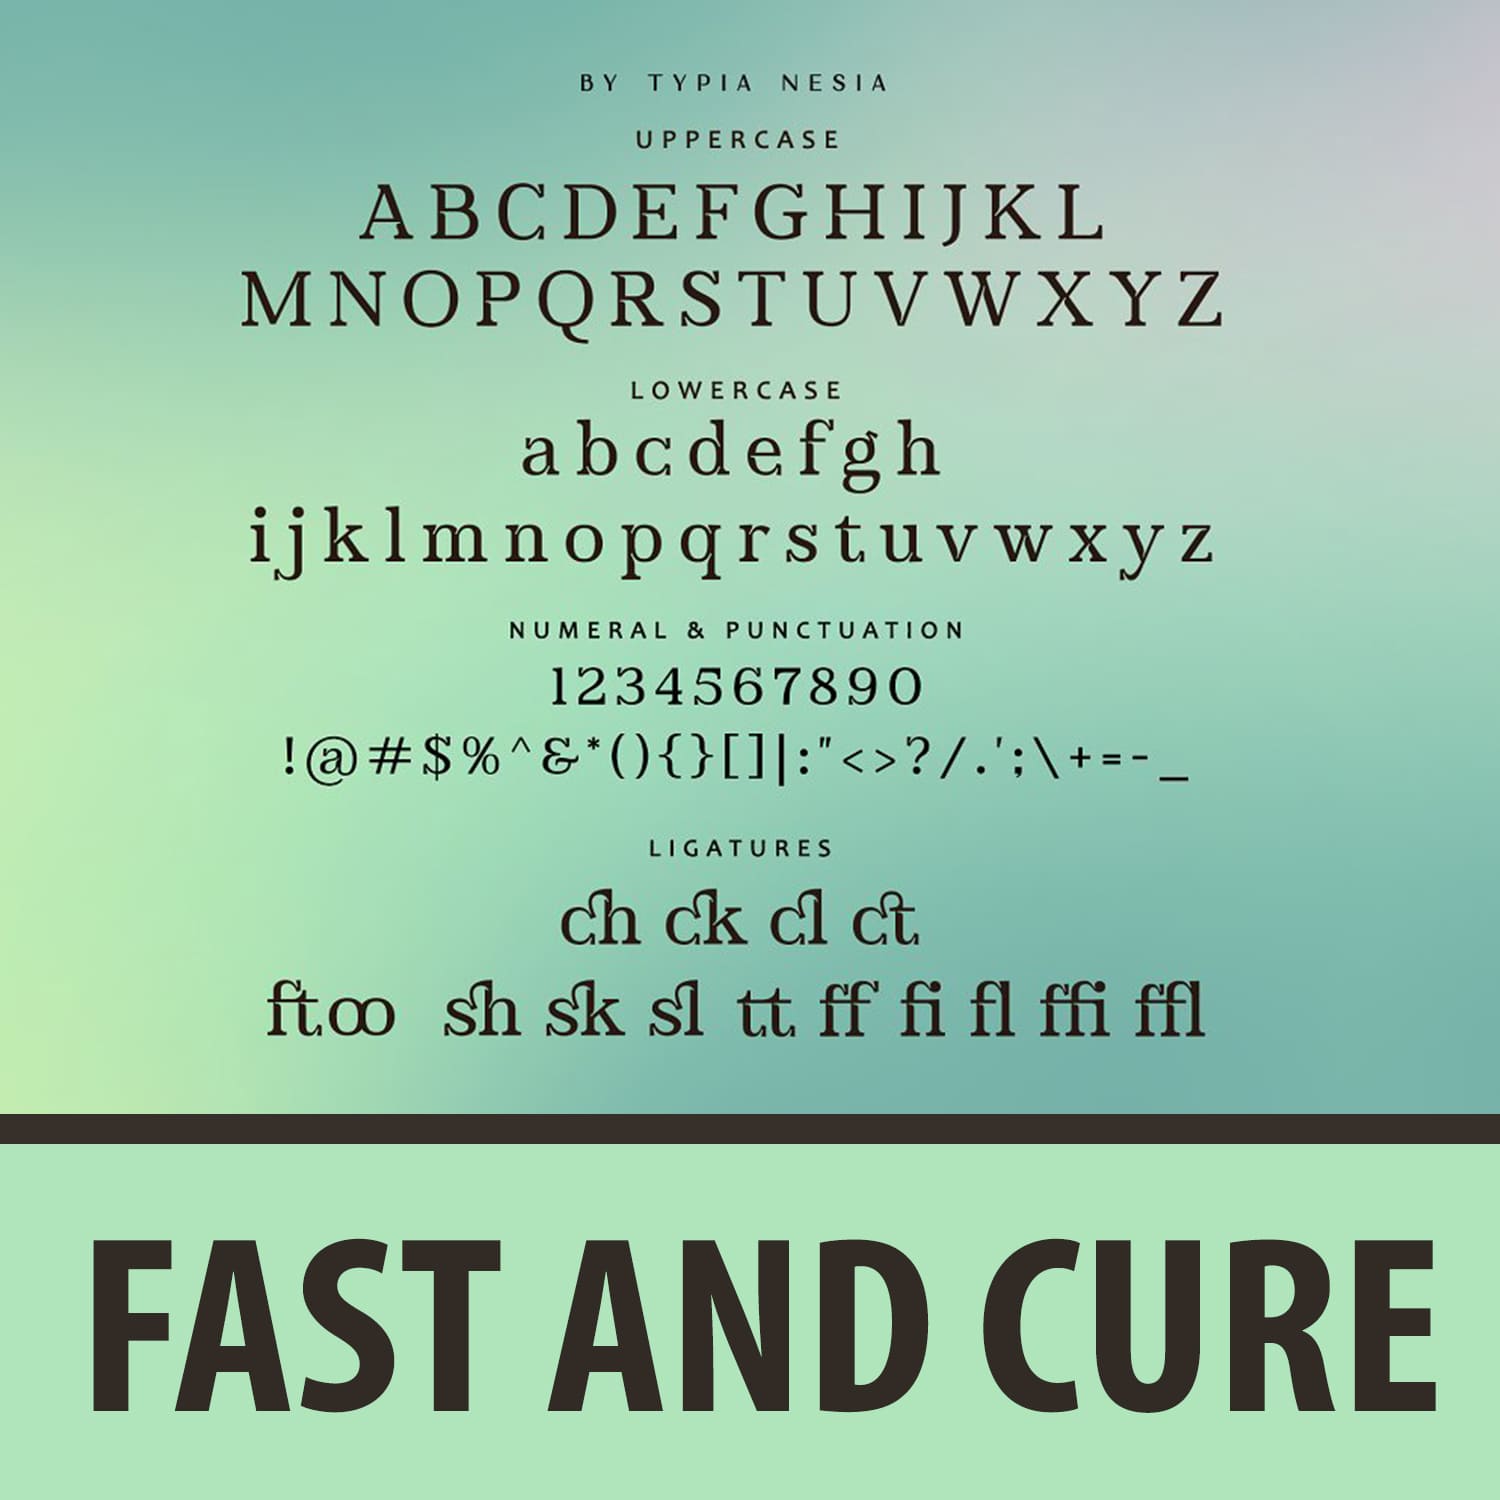 Fast and Cure cover image.